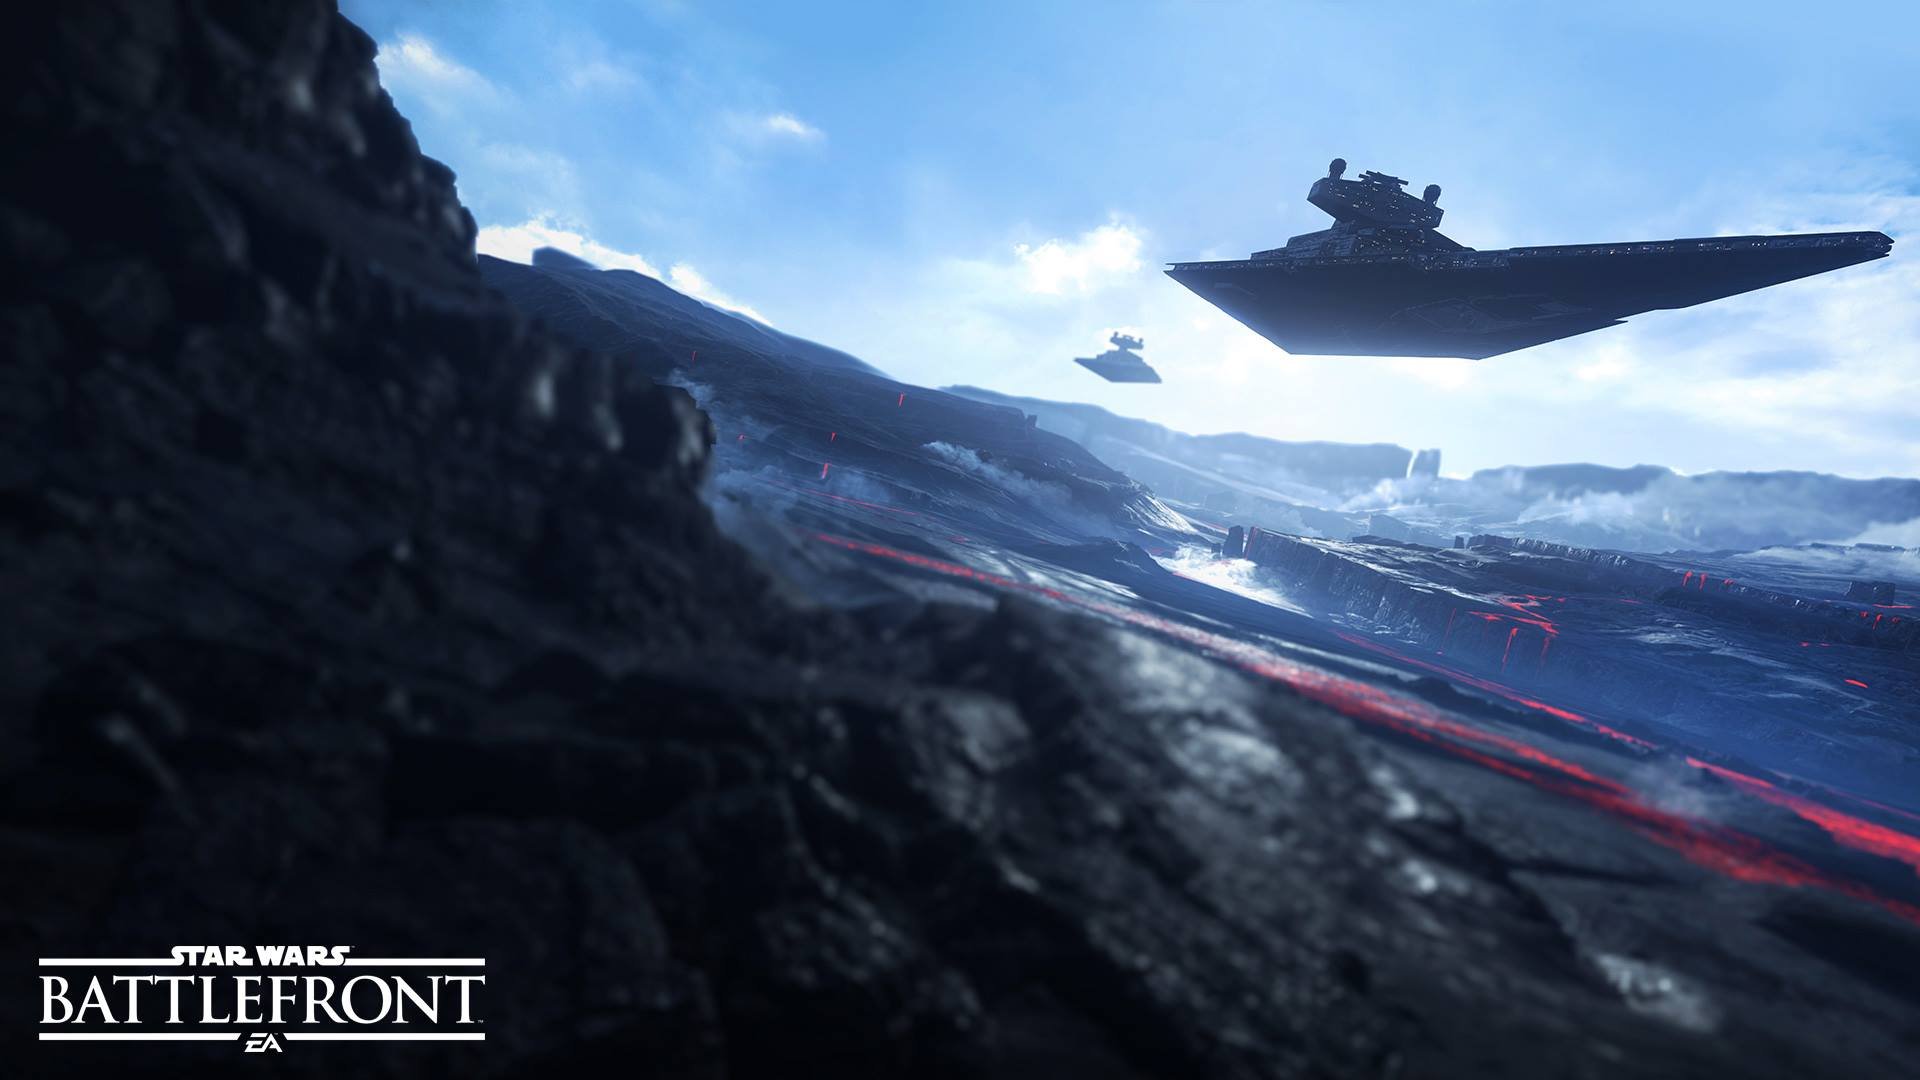 star, Wars, Battlefront, Sci fi, 1swbattlefront, Action, Fighting, Futuristic, Shooter, Poster, Spaceship Wallpaper